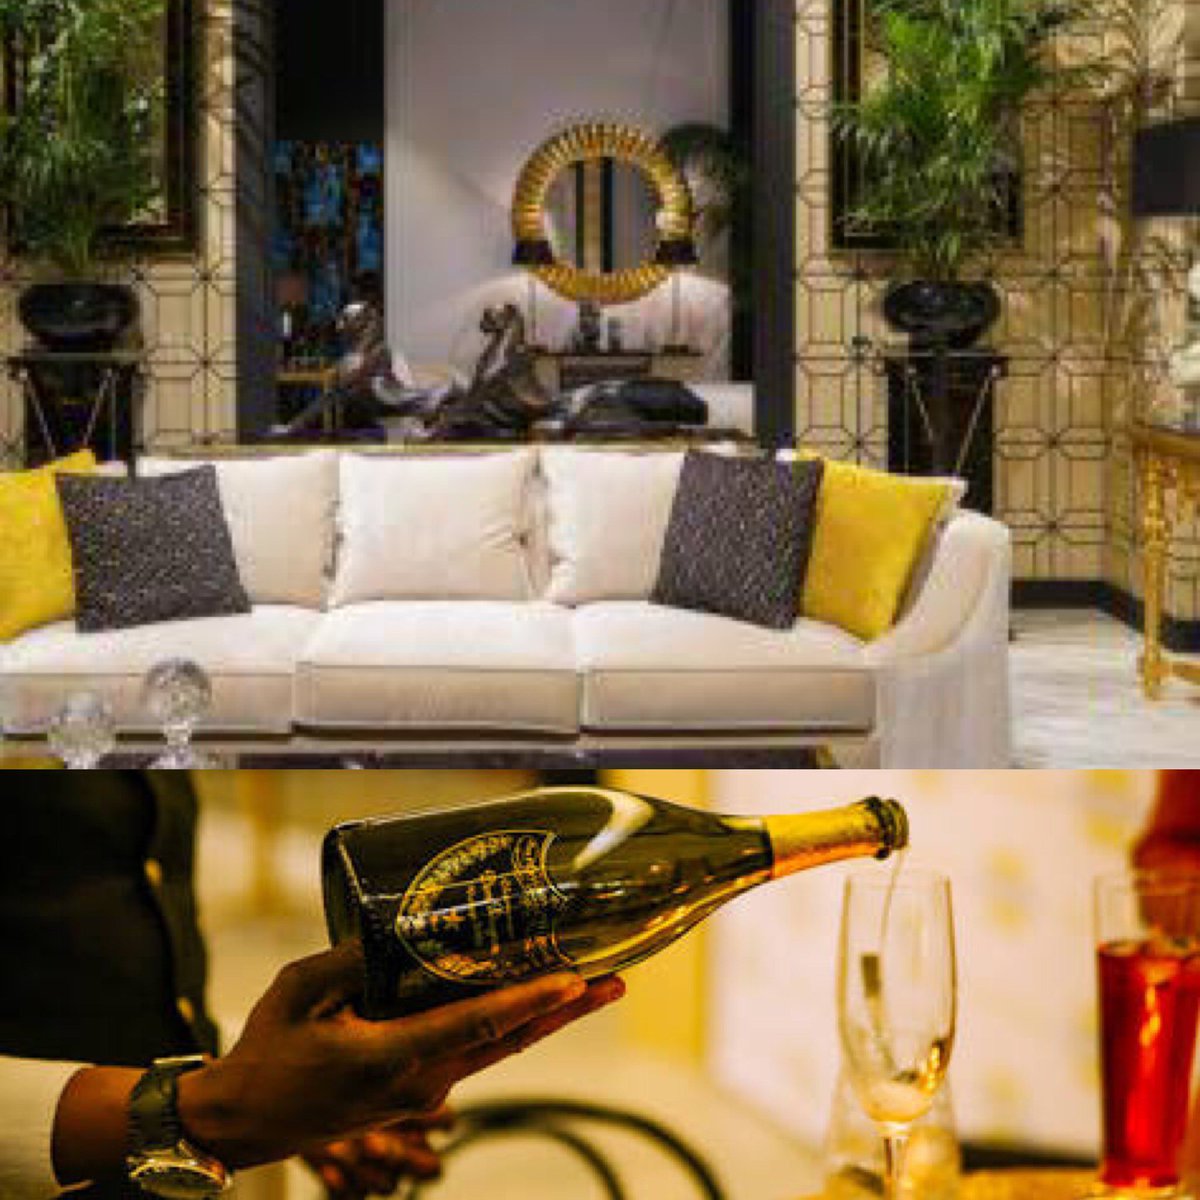 Definition of Opulence 

A display of: luxuriousness, sumptuousness, lavishness, richness, splendour, magnificence, grandeur, swankiness, poshness, classiness, 
wealth, affluence #timelessopulence @opulentexperience @barbiliscious